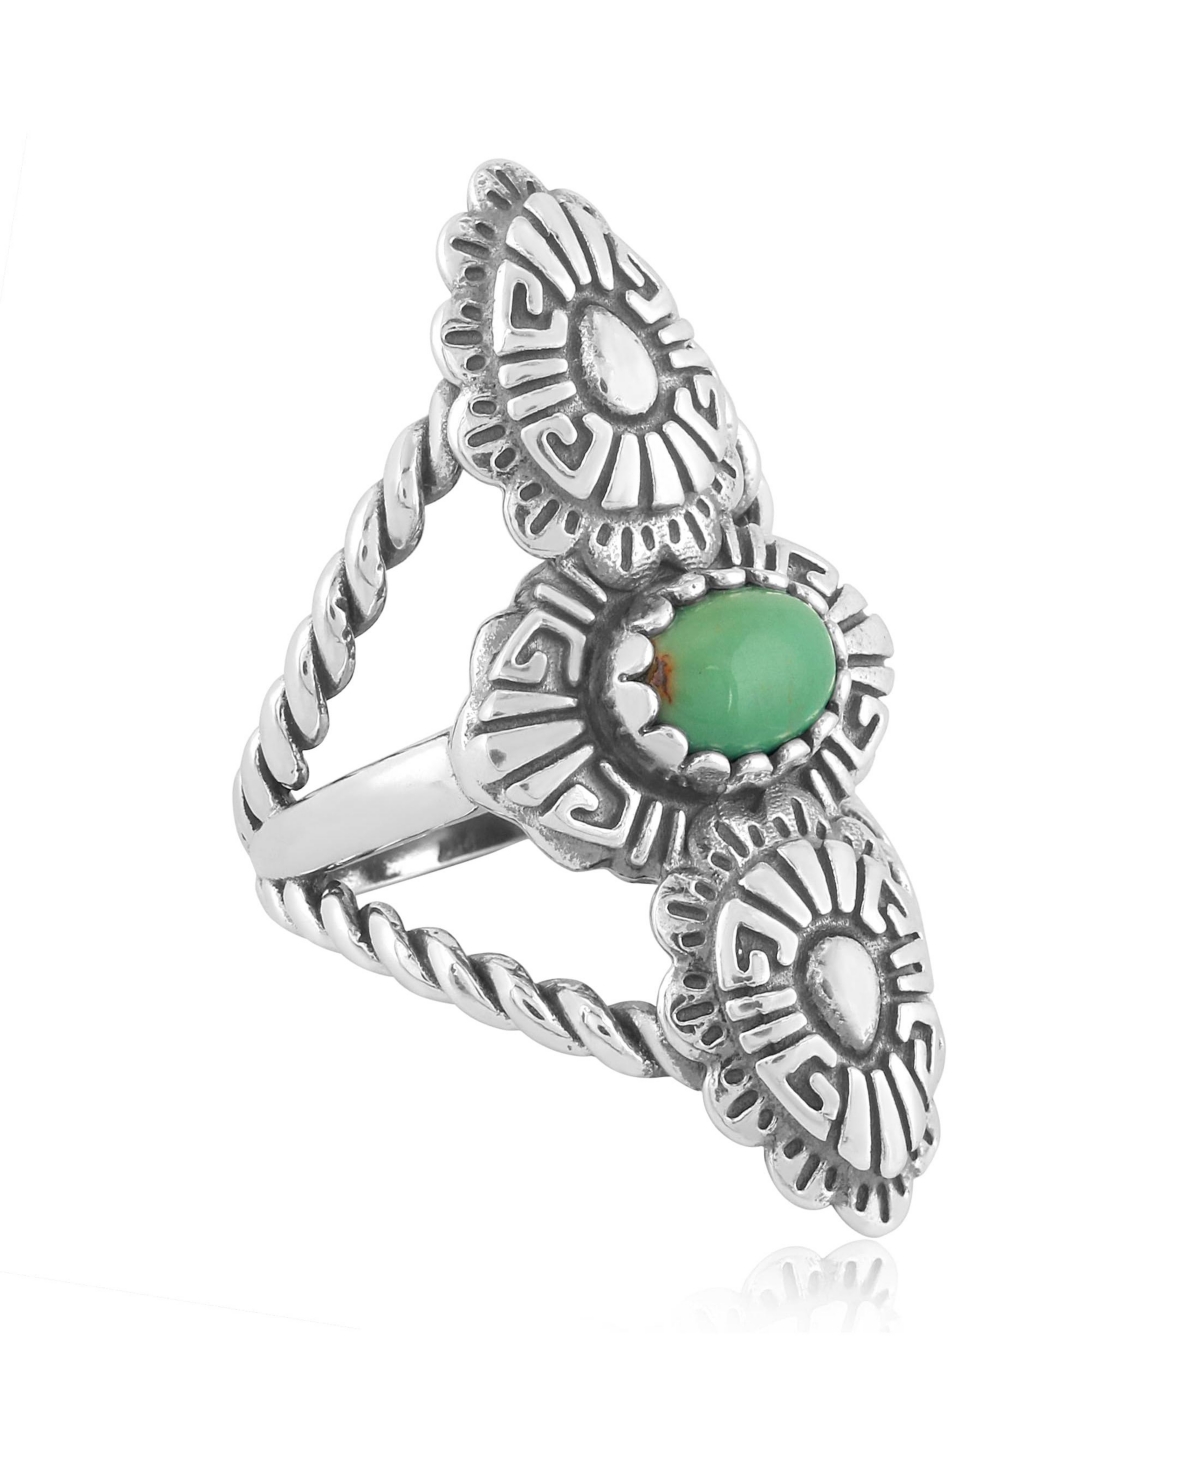 Genuine Gemstone and Sterling Silver Concha Rope Ring, Sizes 5-10 - Green turquoise